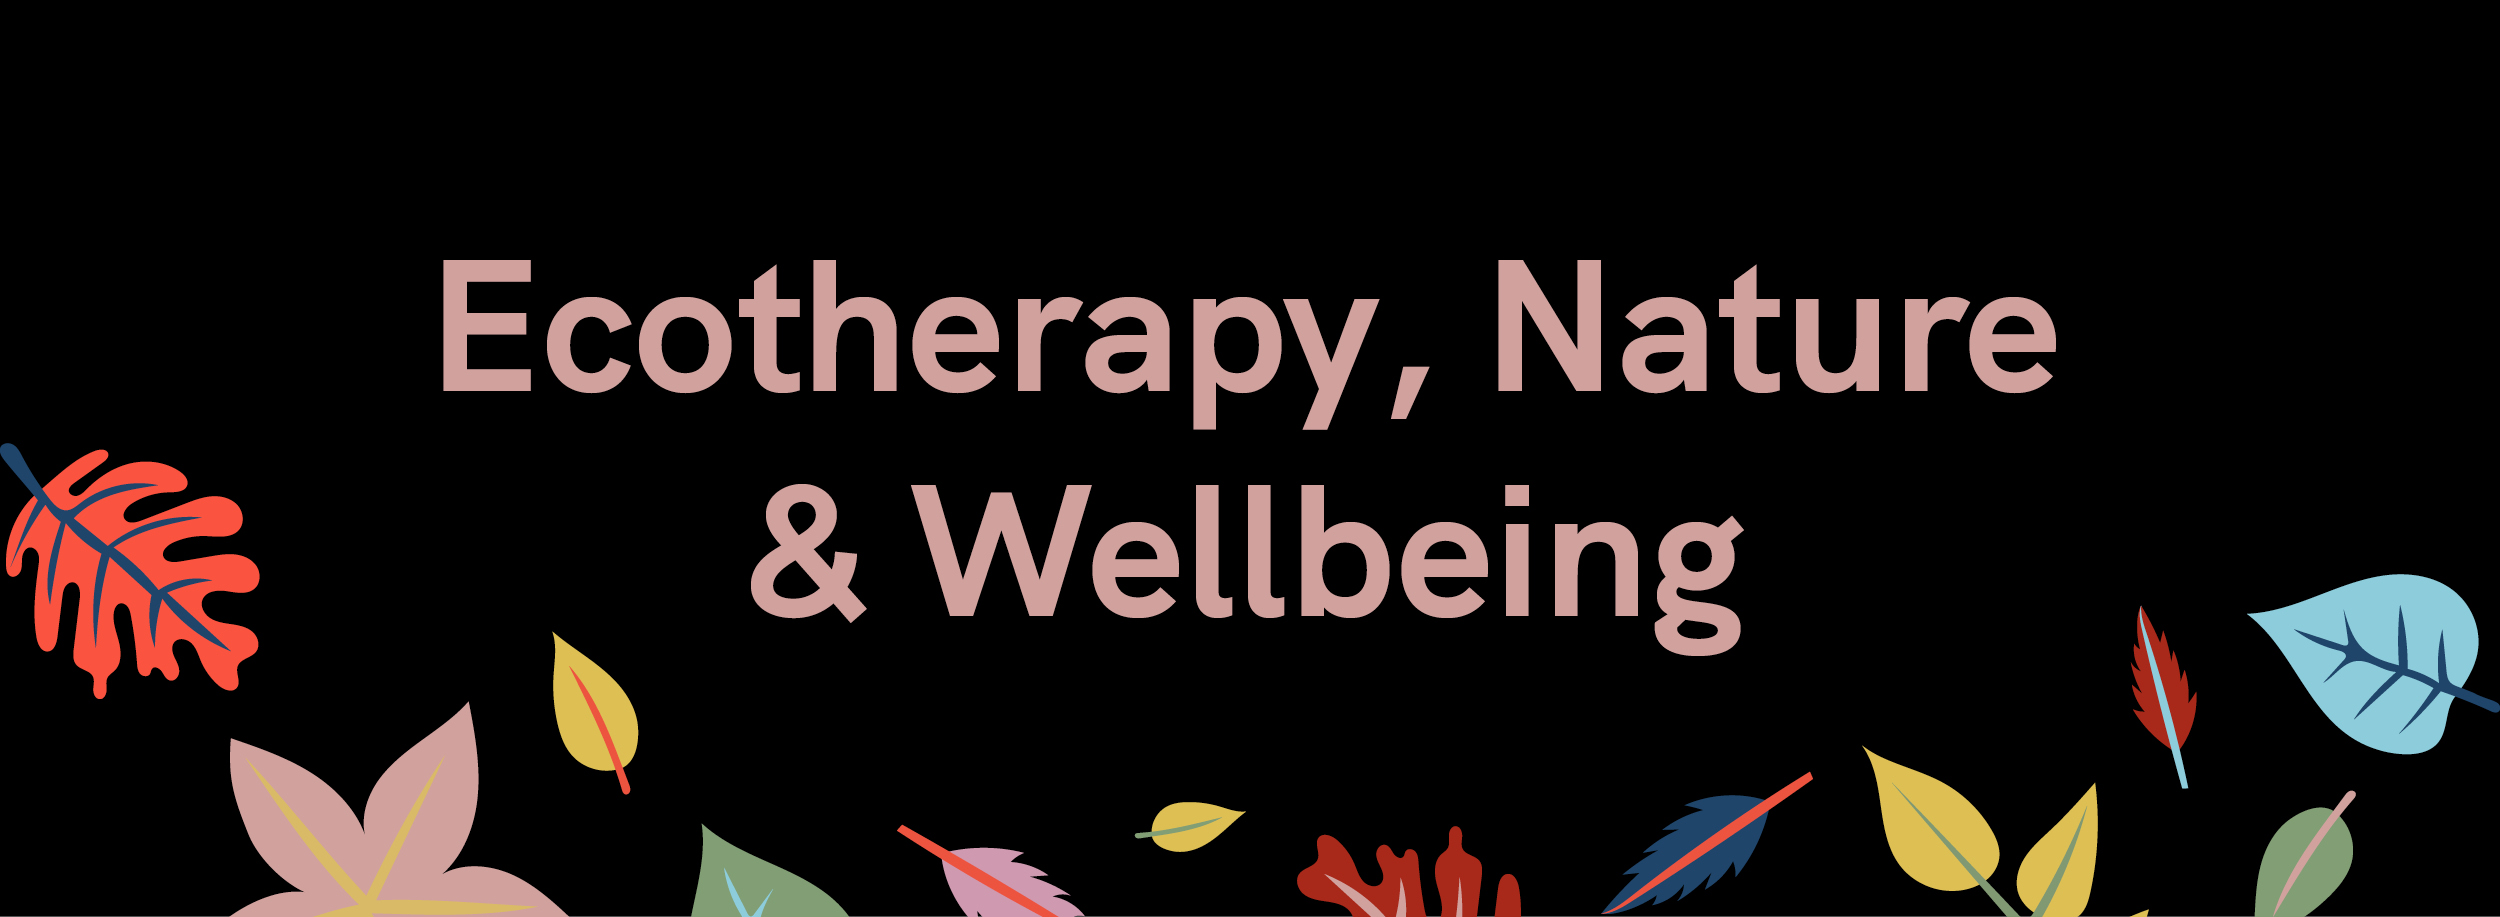 Ecotherapy, nature and wellbeing